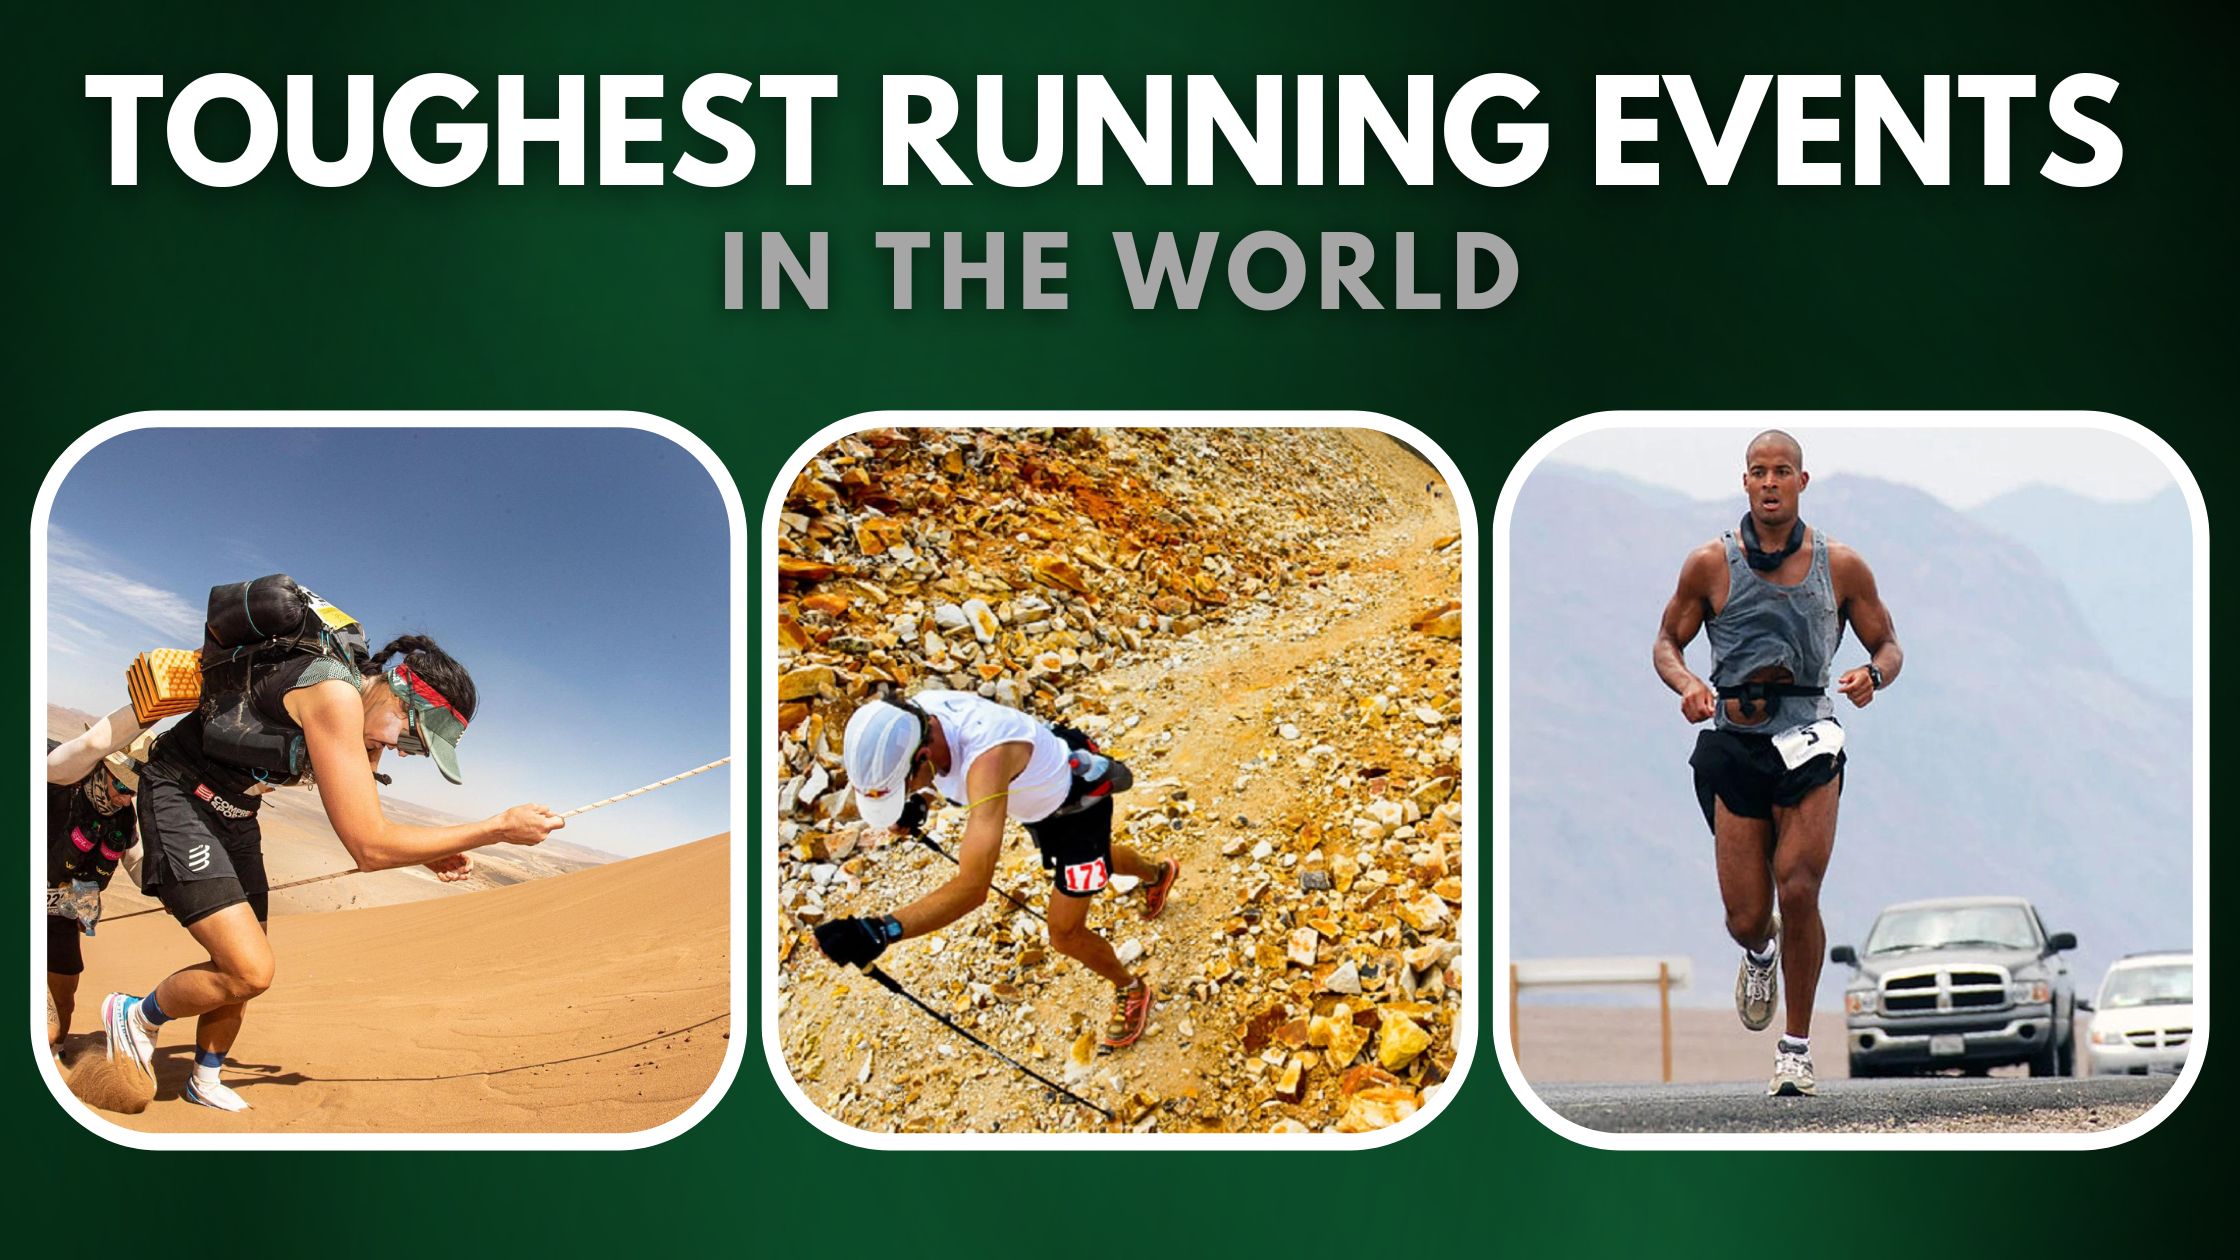 Toughest Running Events in the World